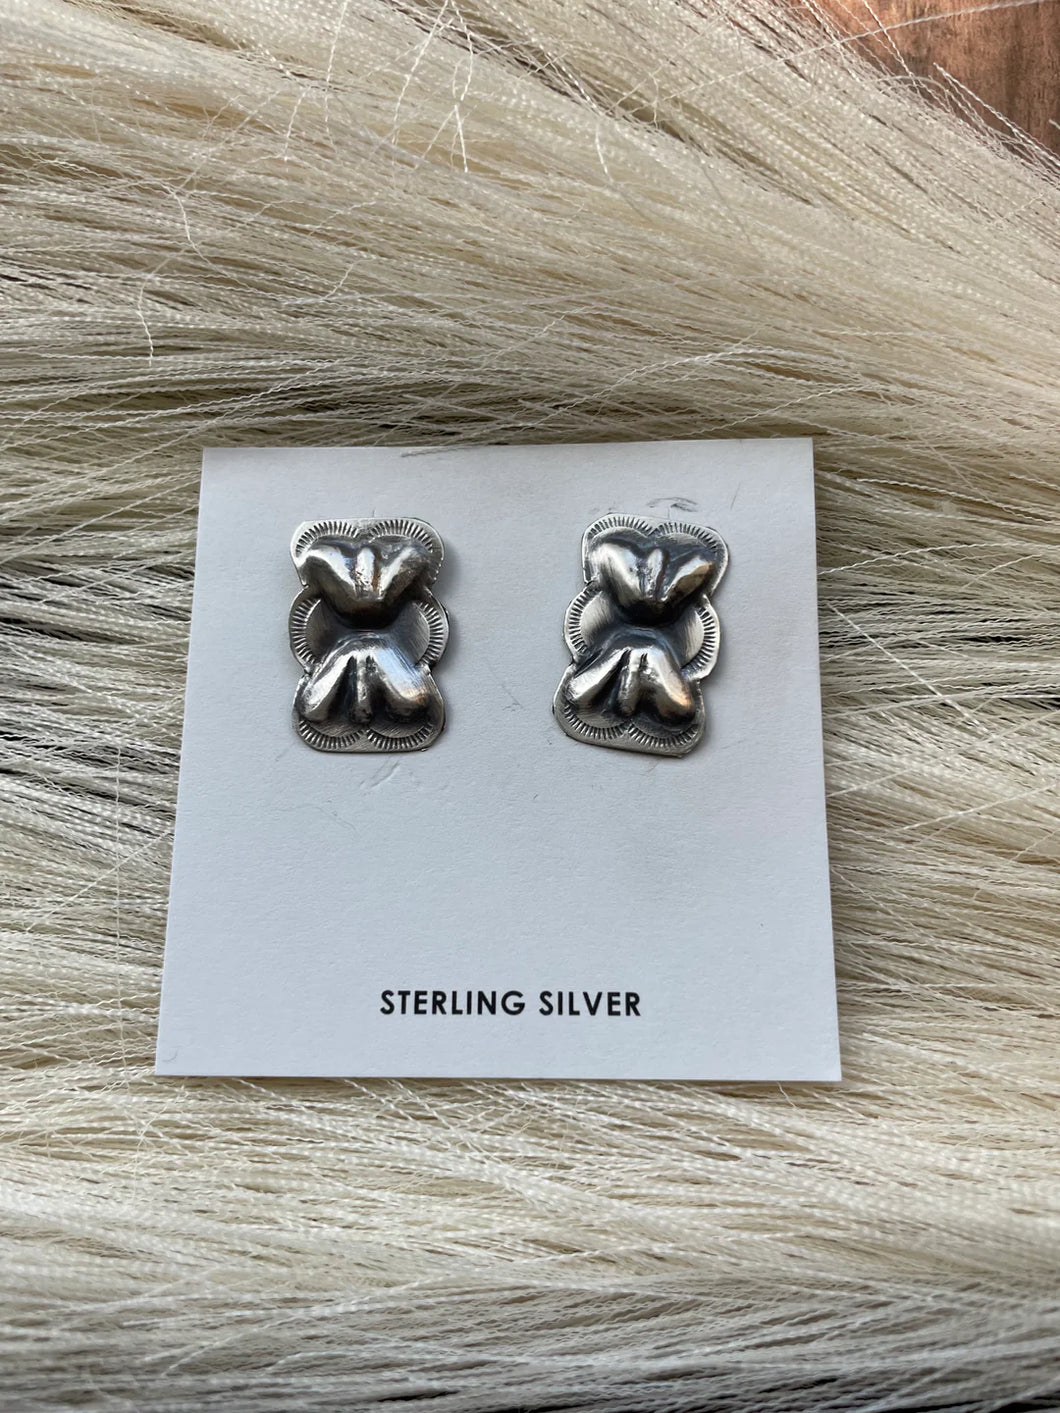 *AUTHENTIC* NAVAJO STERLING SILVER BOW TIE CONCHO EARRINGS